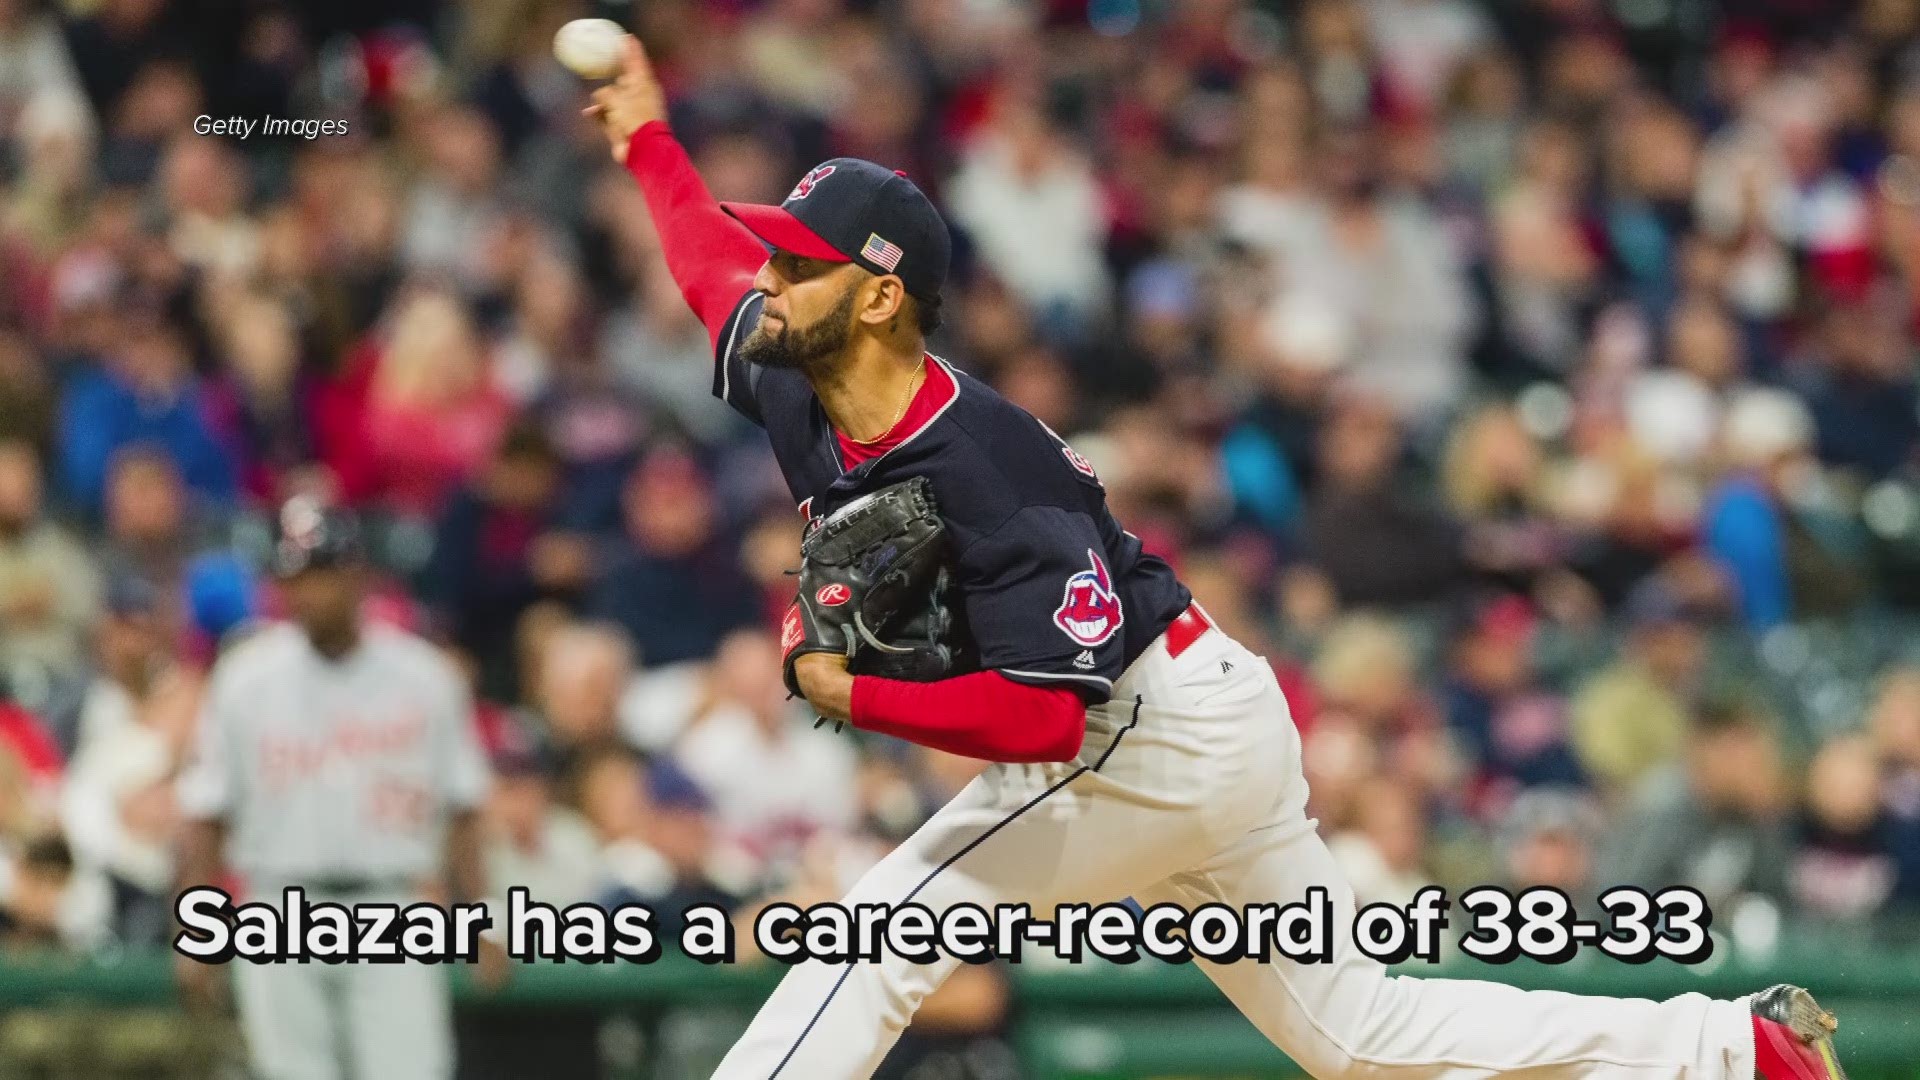 Cleveland Indians RHP Danny Salazar to miss rest of 2018 season after undergoing shoulder surgery